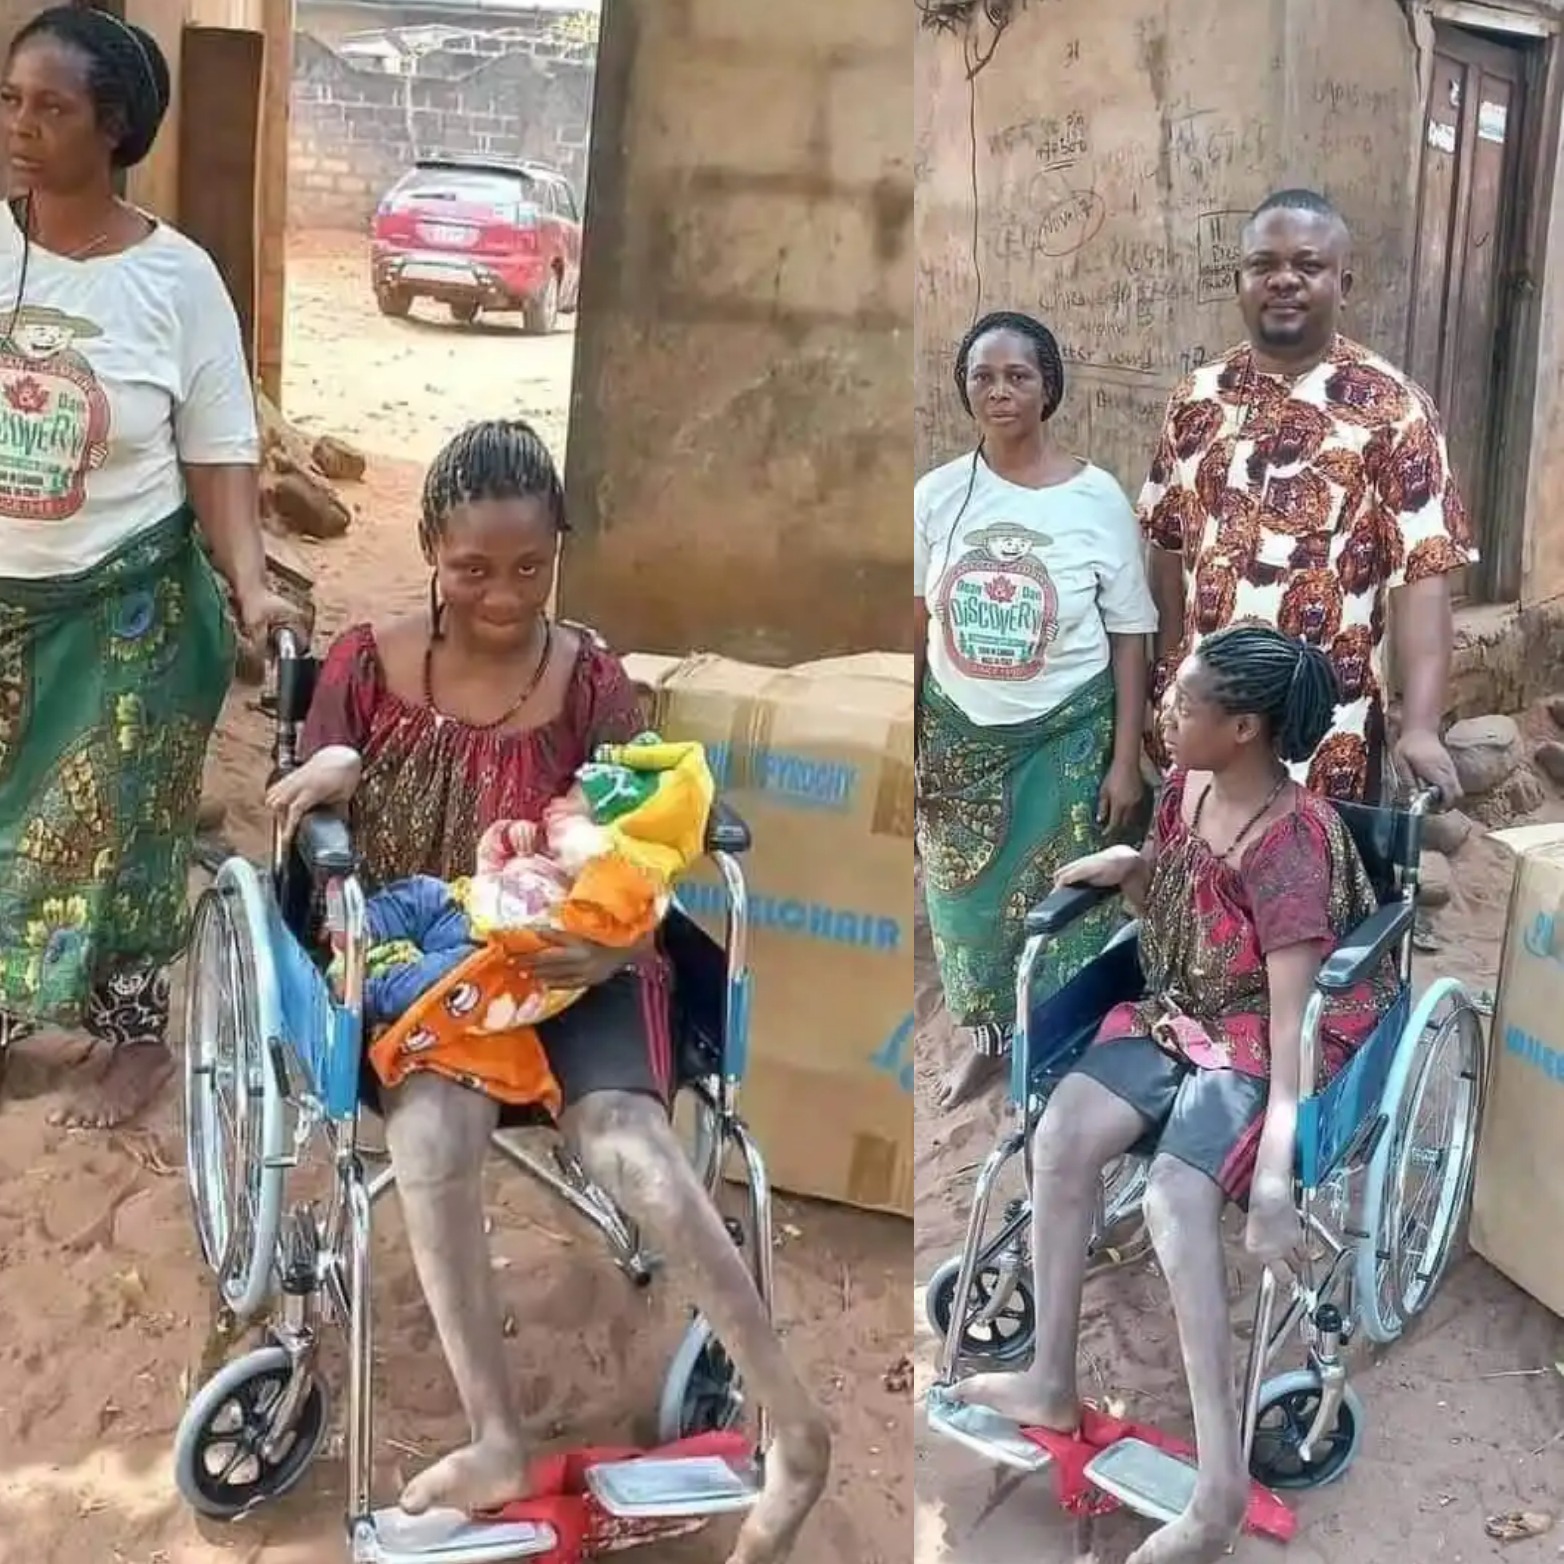 Little Girl Who Can't Walk Or Talk Gave Birth To 2 Children After Strangers Did This To Her At Home 1